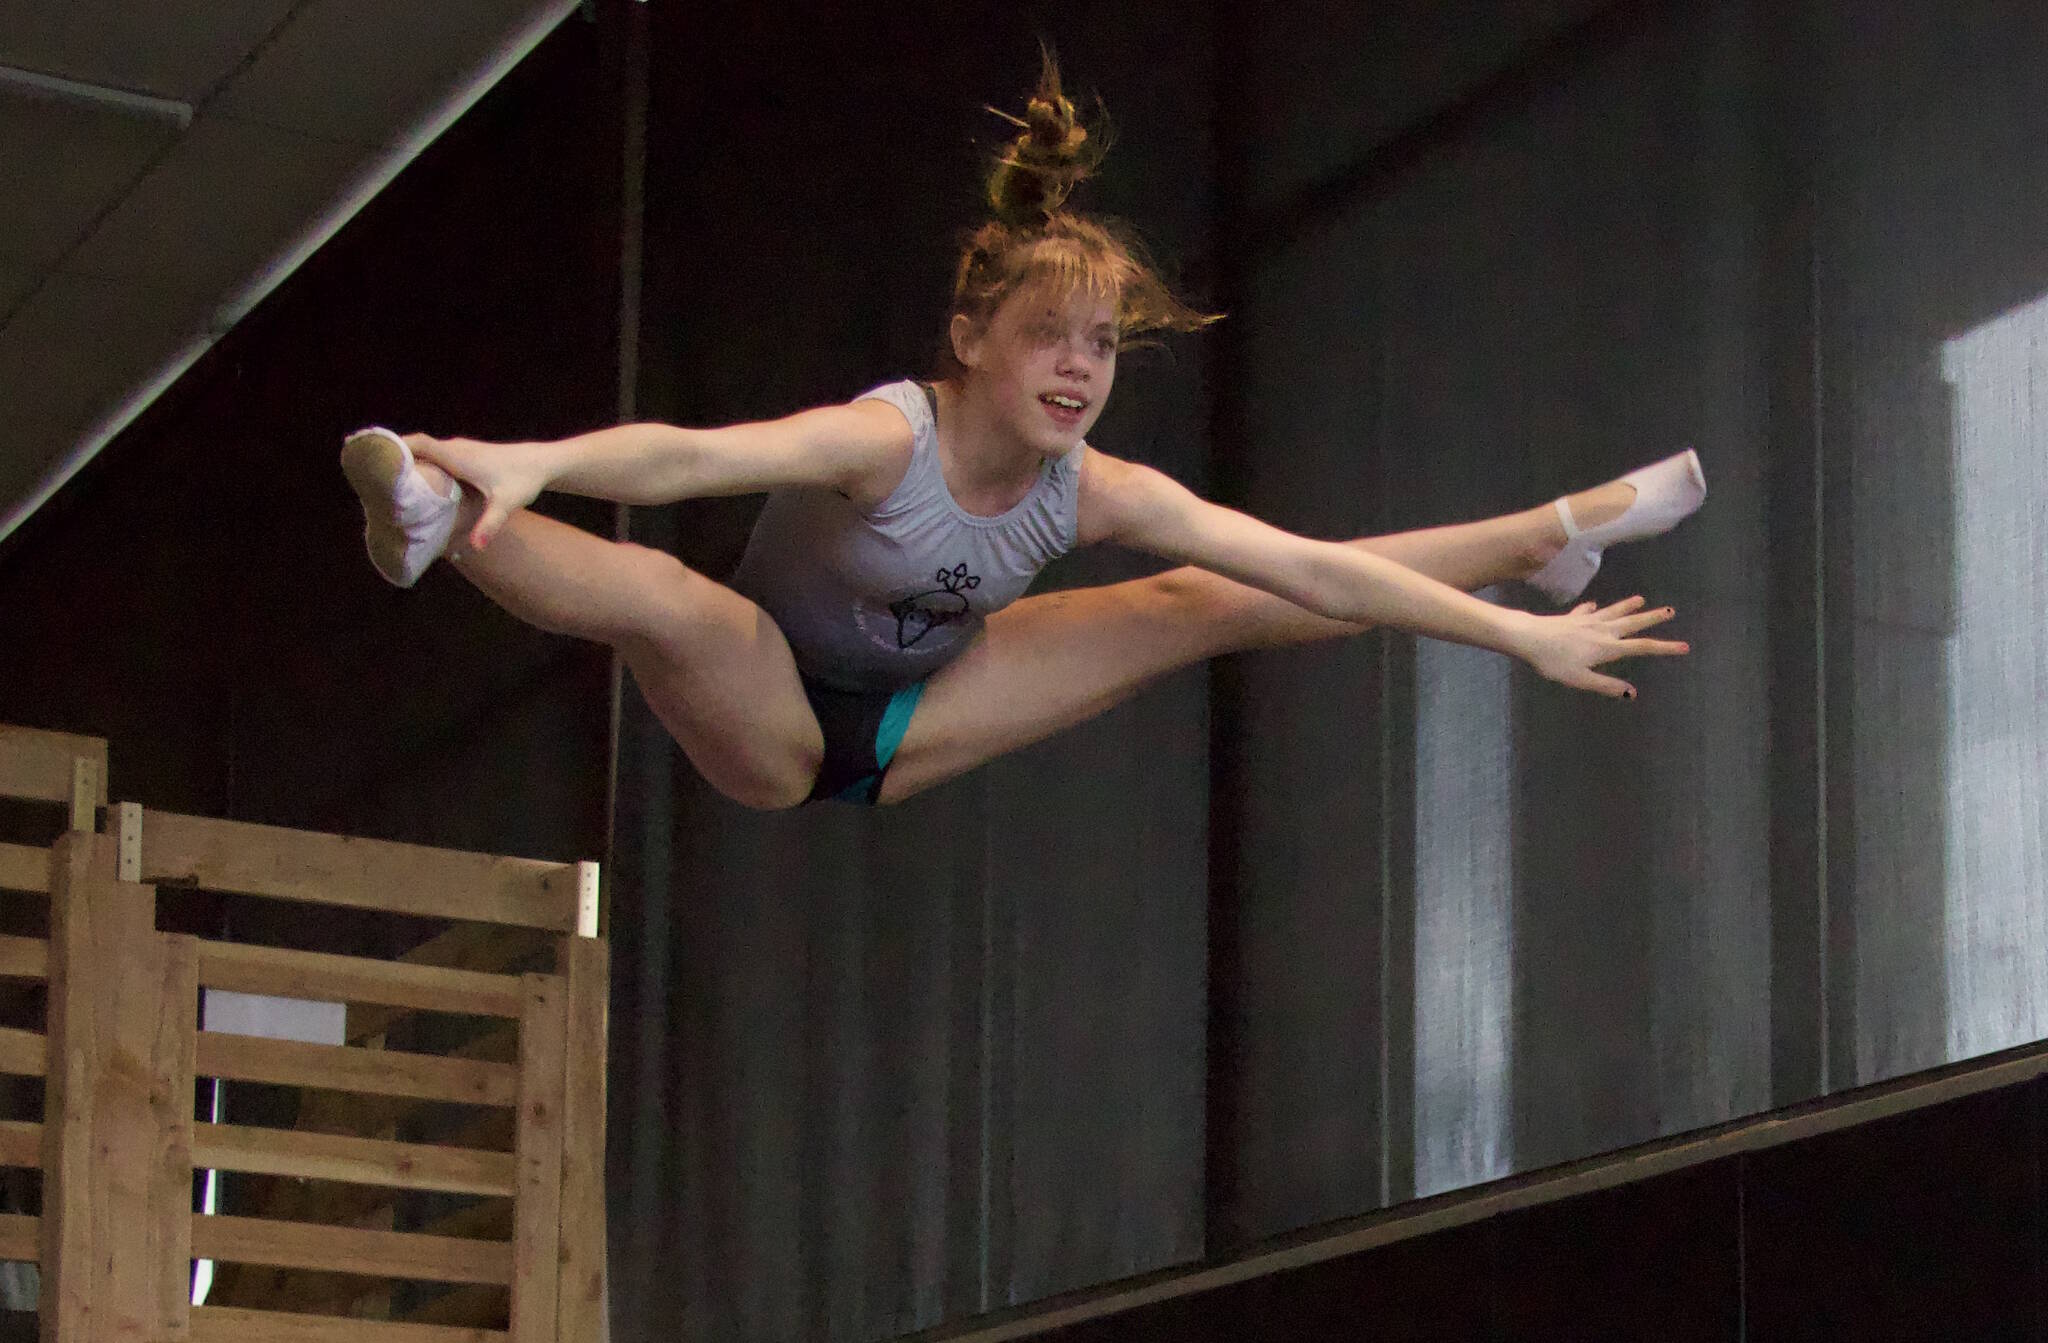 Malaina Yargo, 14, straddle jumps on a trampoline. Yargo is a national qualifier in double mini. (Photo by Rachel Rosen/Whidbey News-Times)